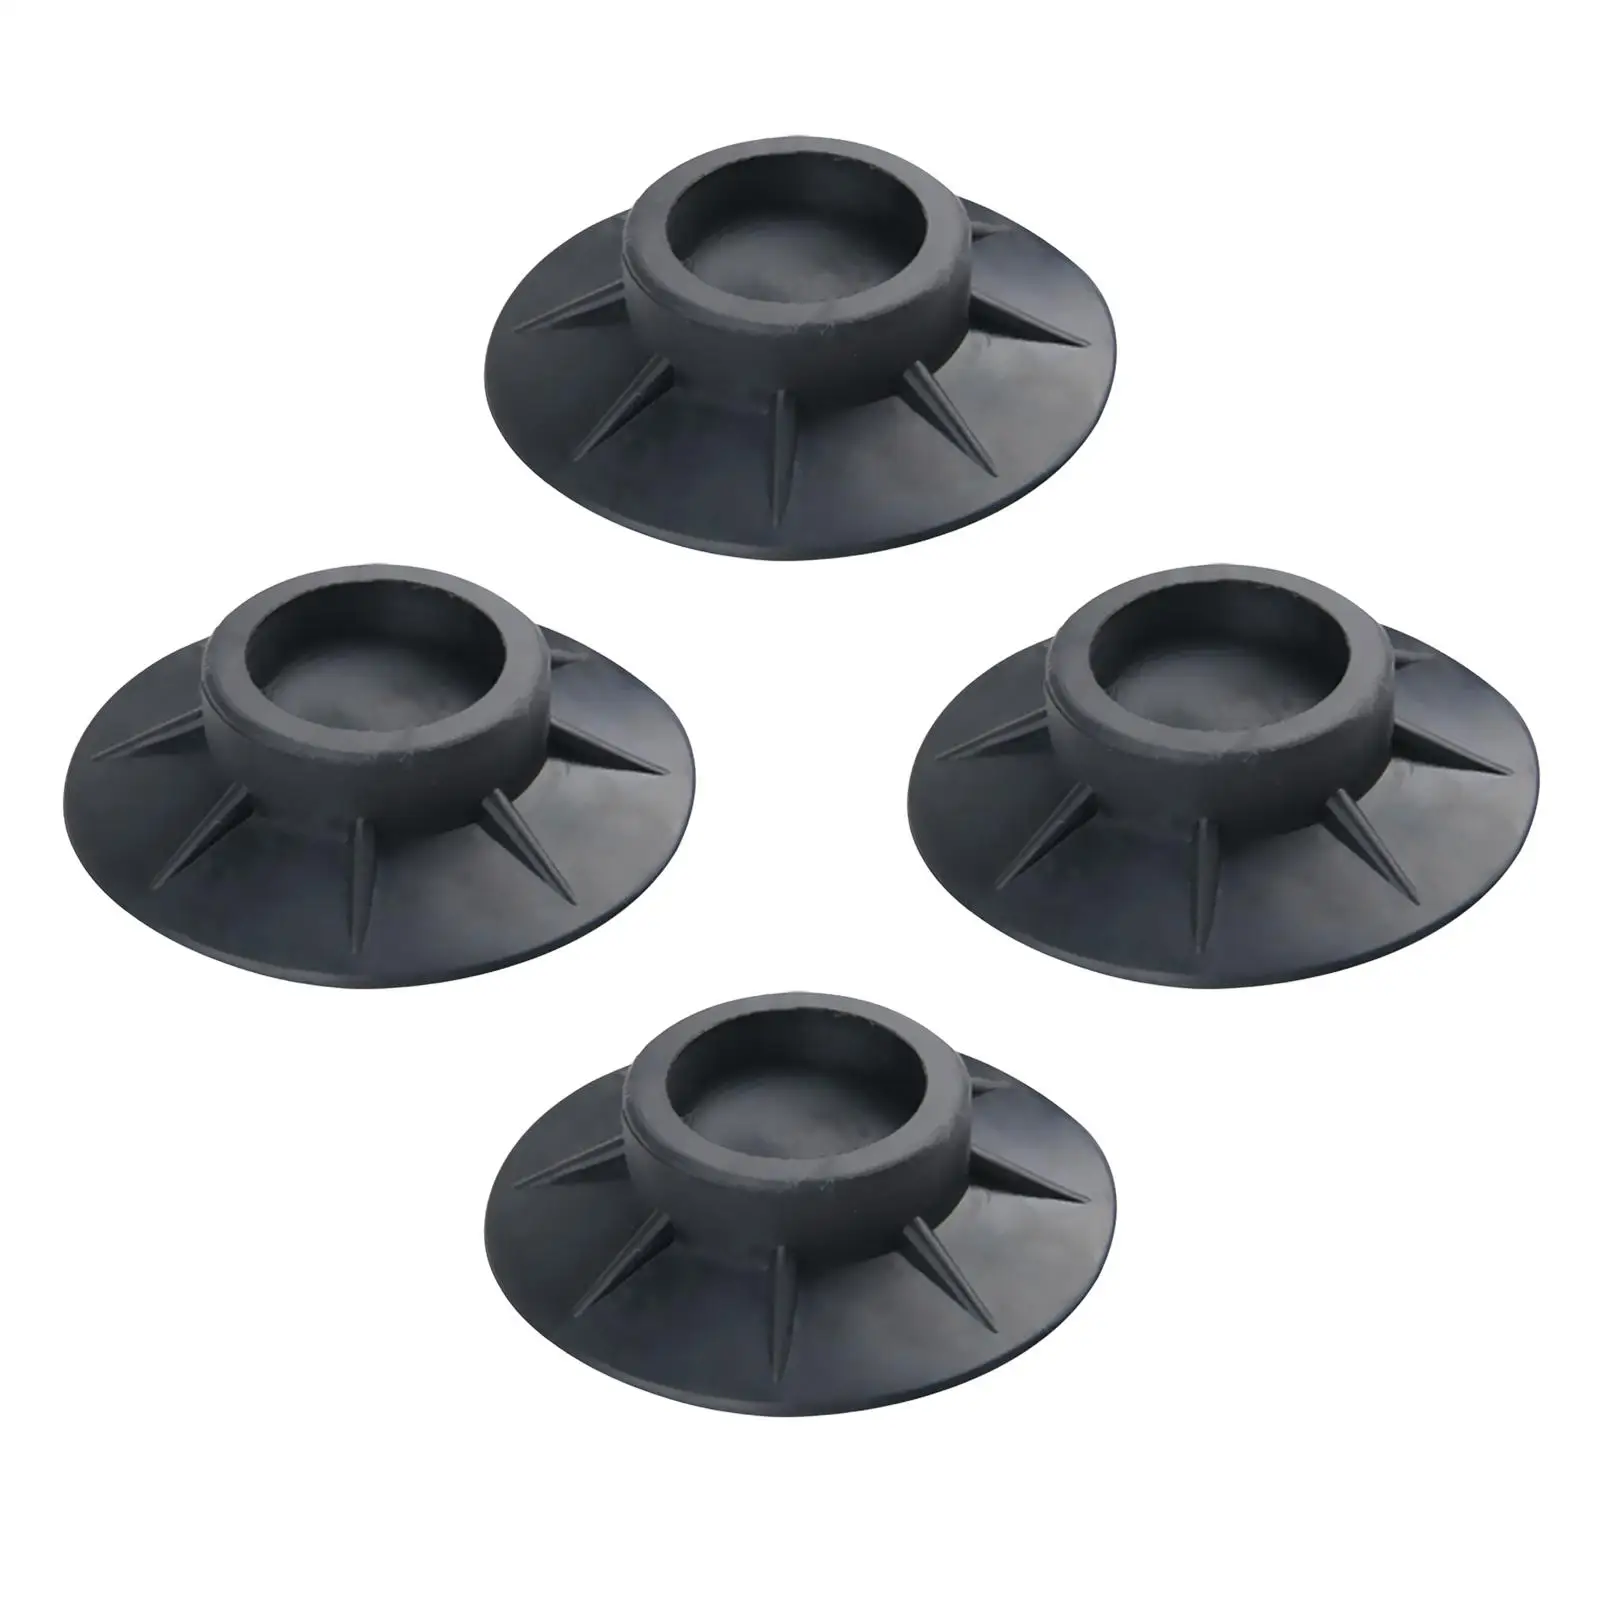 Set of 4 Dryer Pedestals Protection Pad Rubber Covers Slip for Fridge